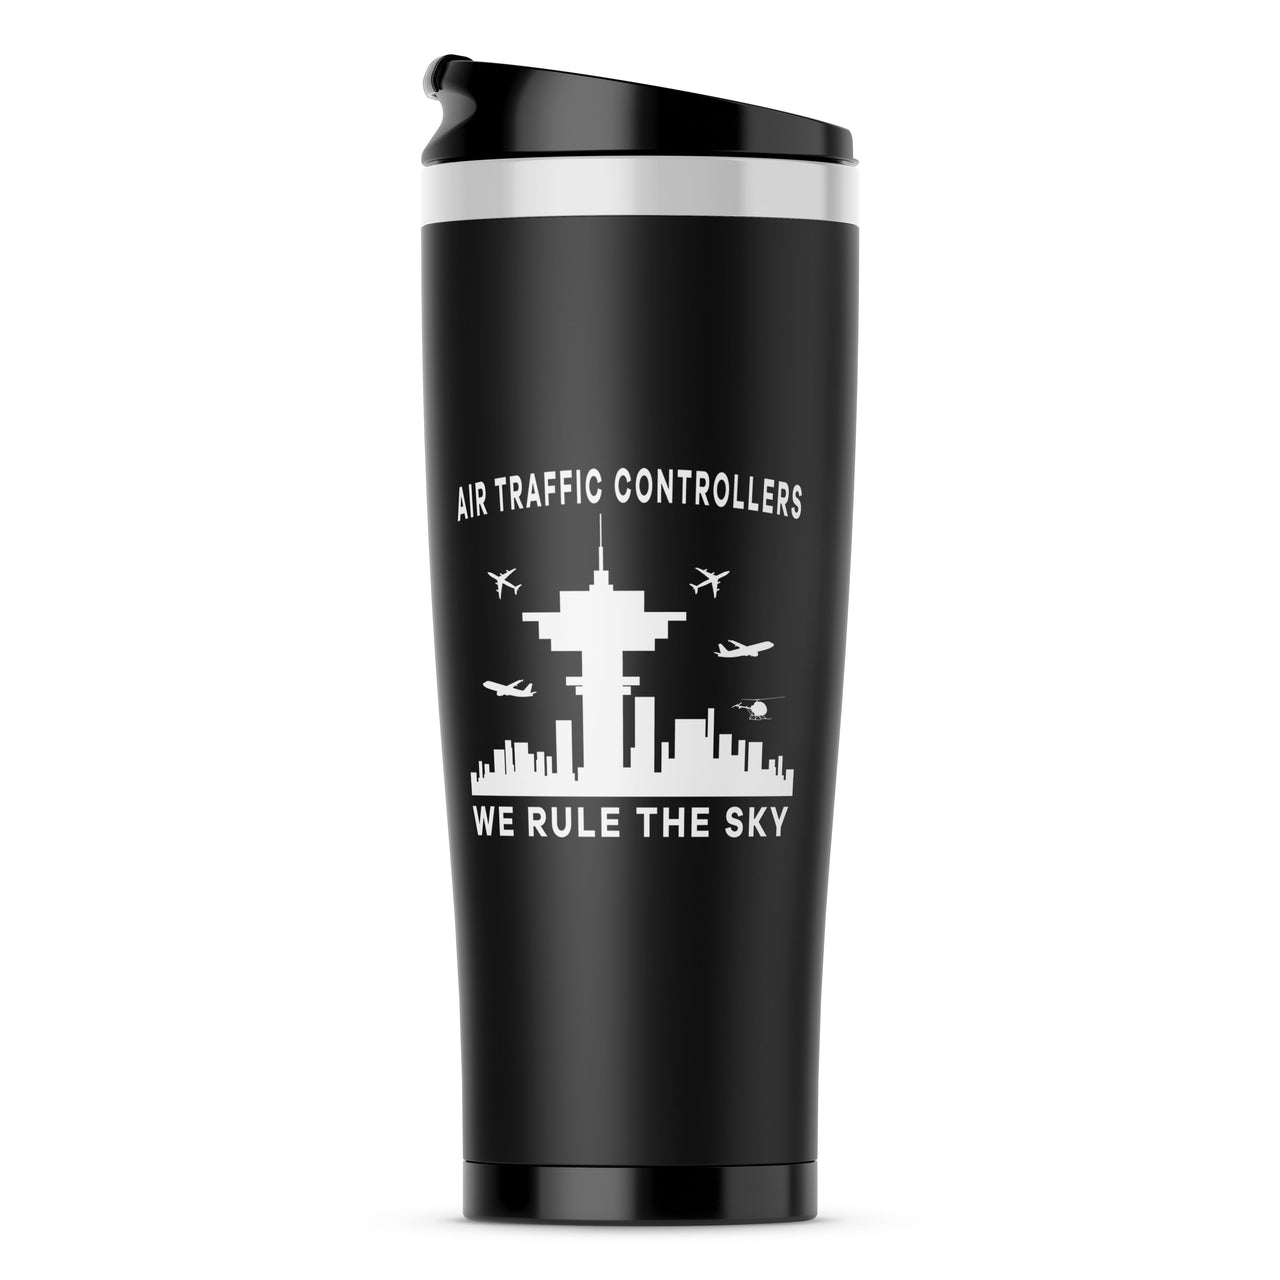 Air Traffic Controllers - We Rule The Sky Designed Stainless Steel Travel Mugs